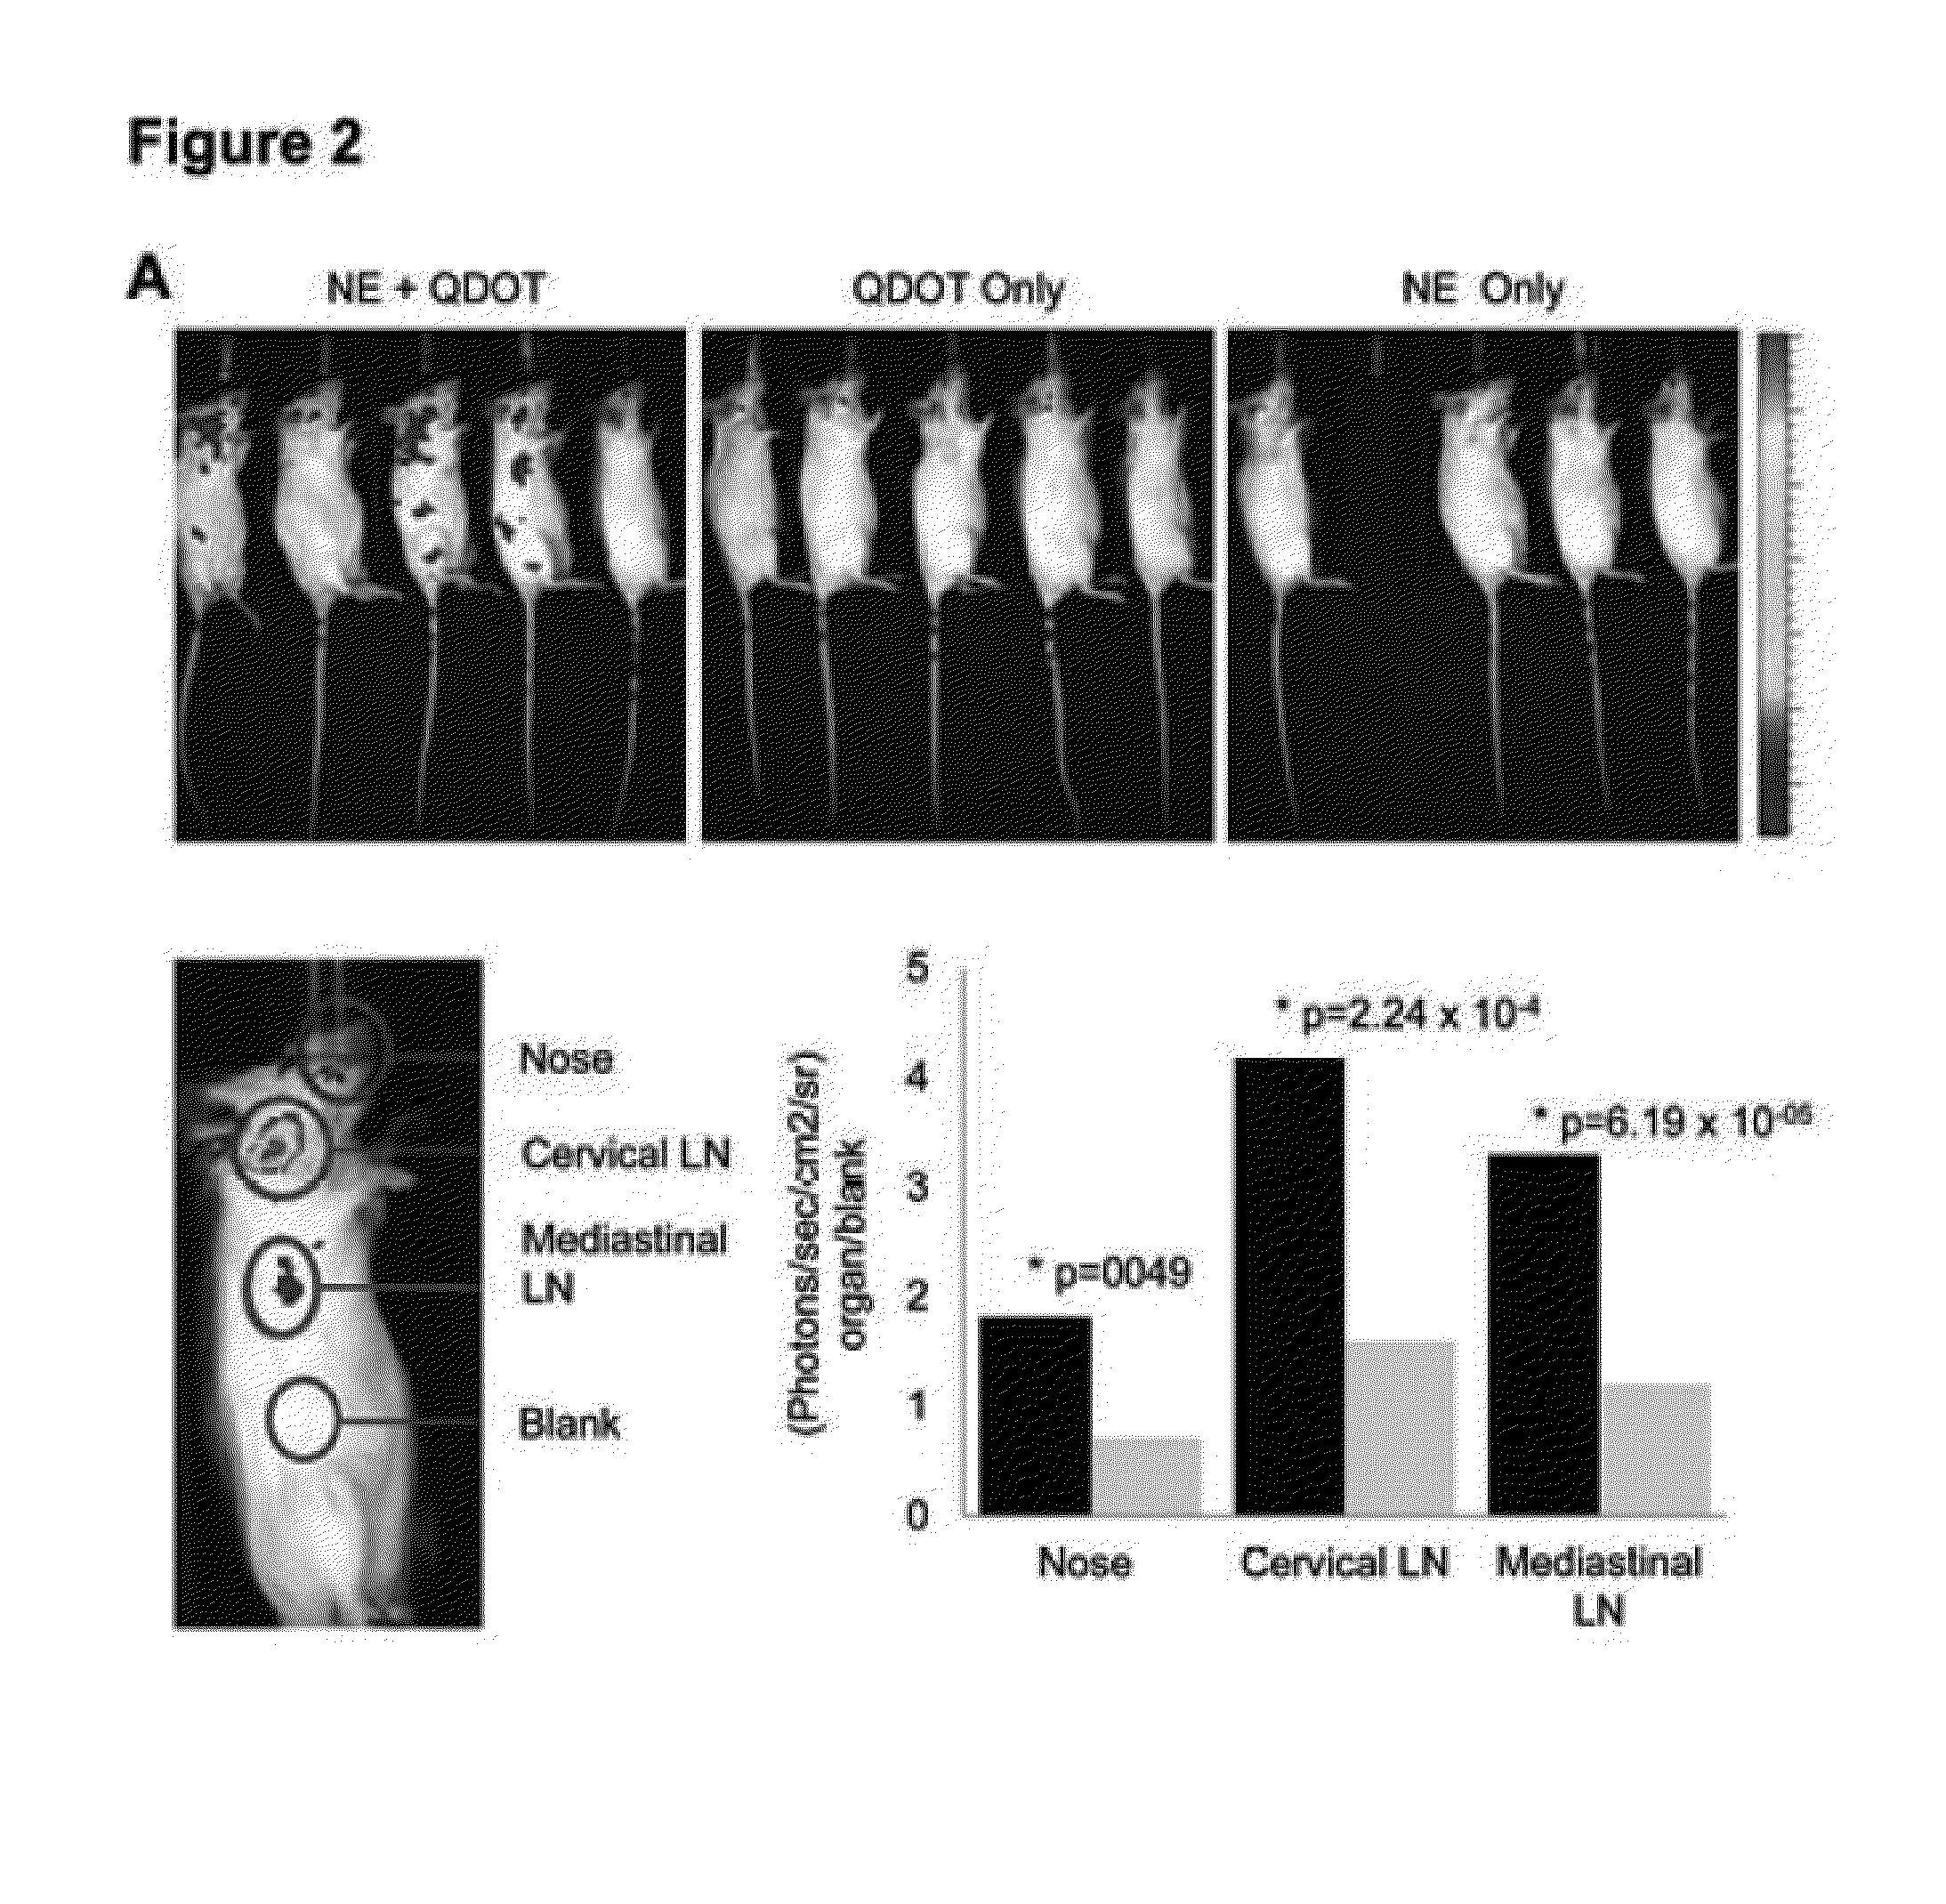 Immunogenic apoptosis inducing compositions and methods of use thereof